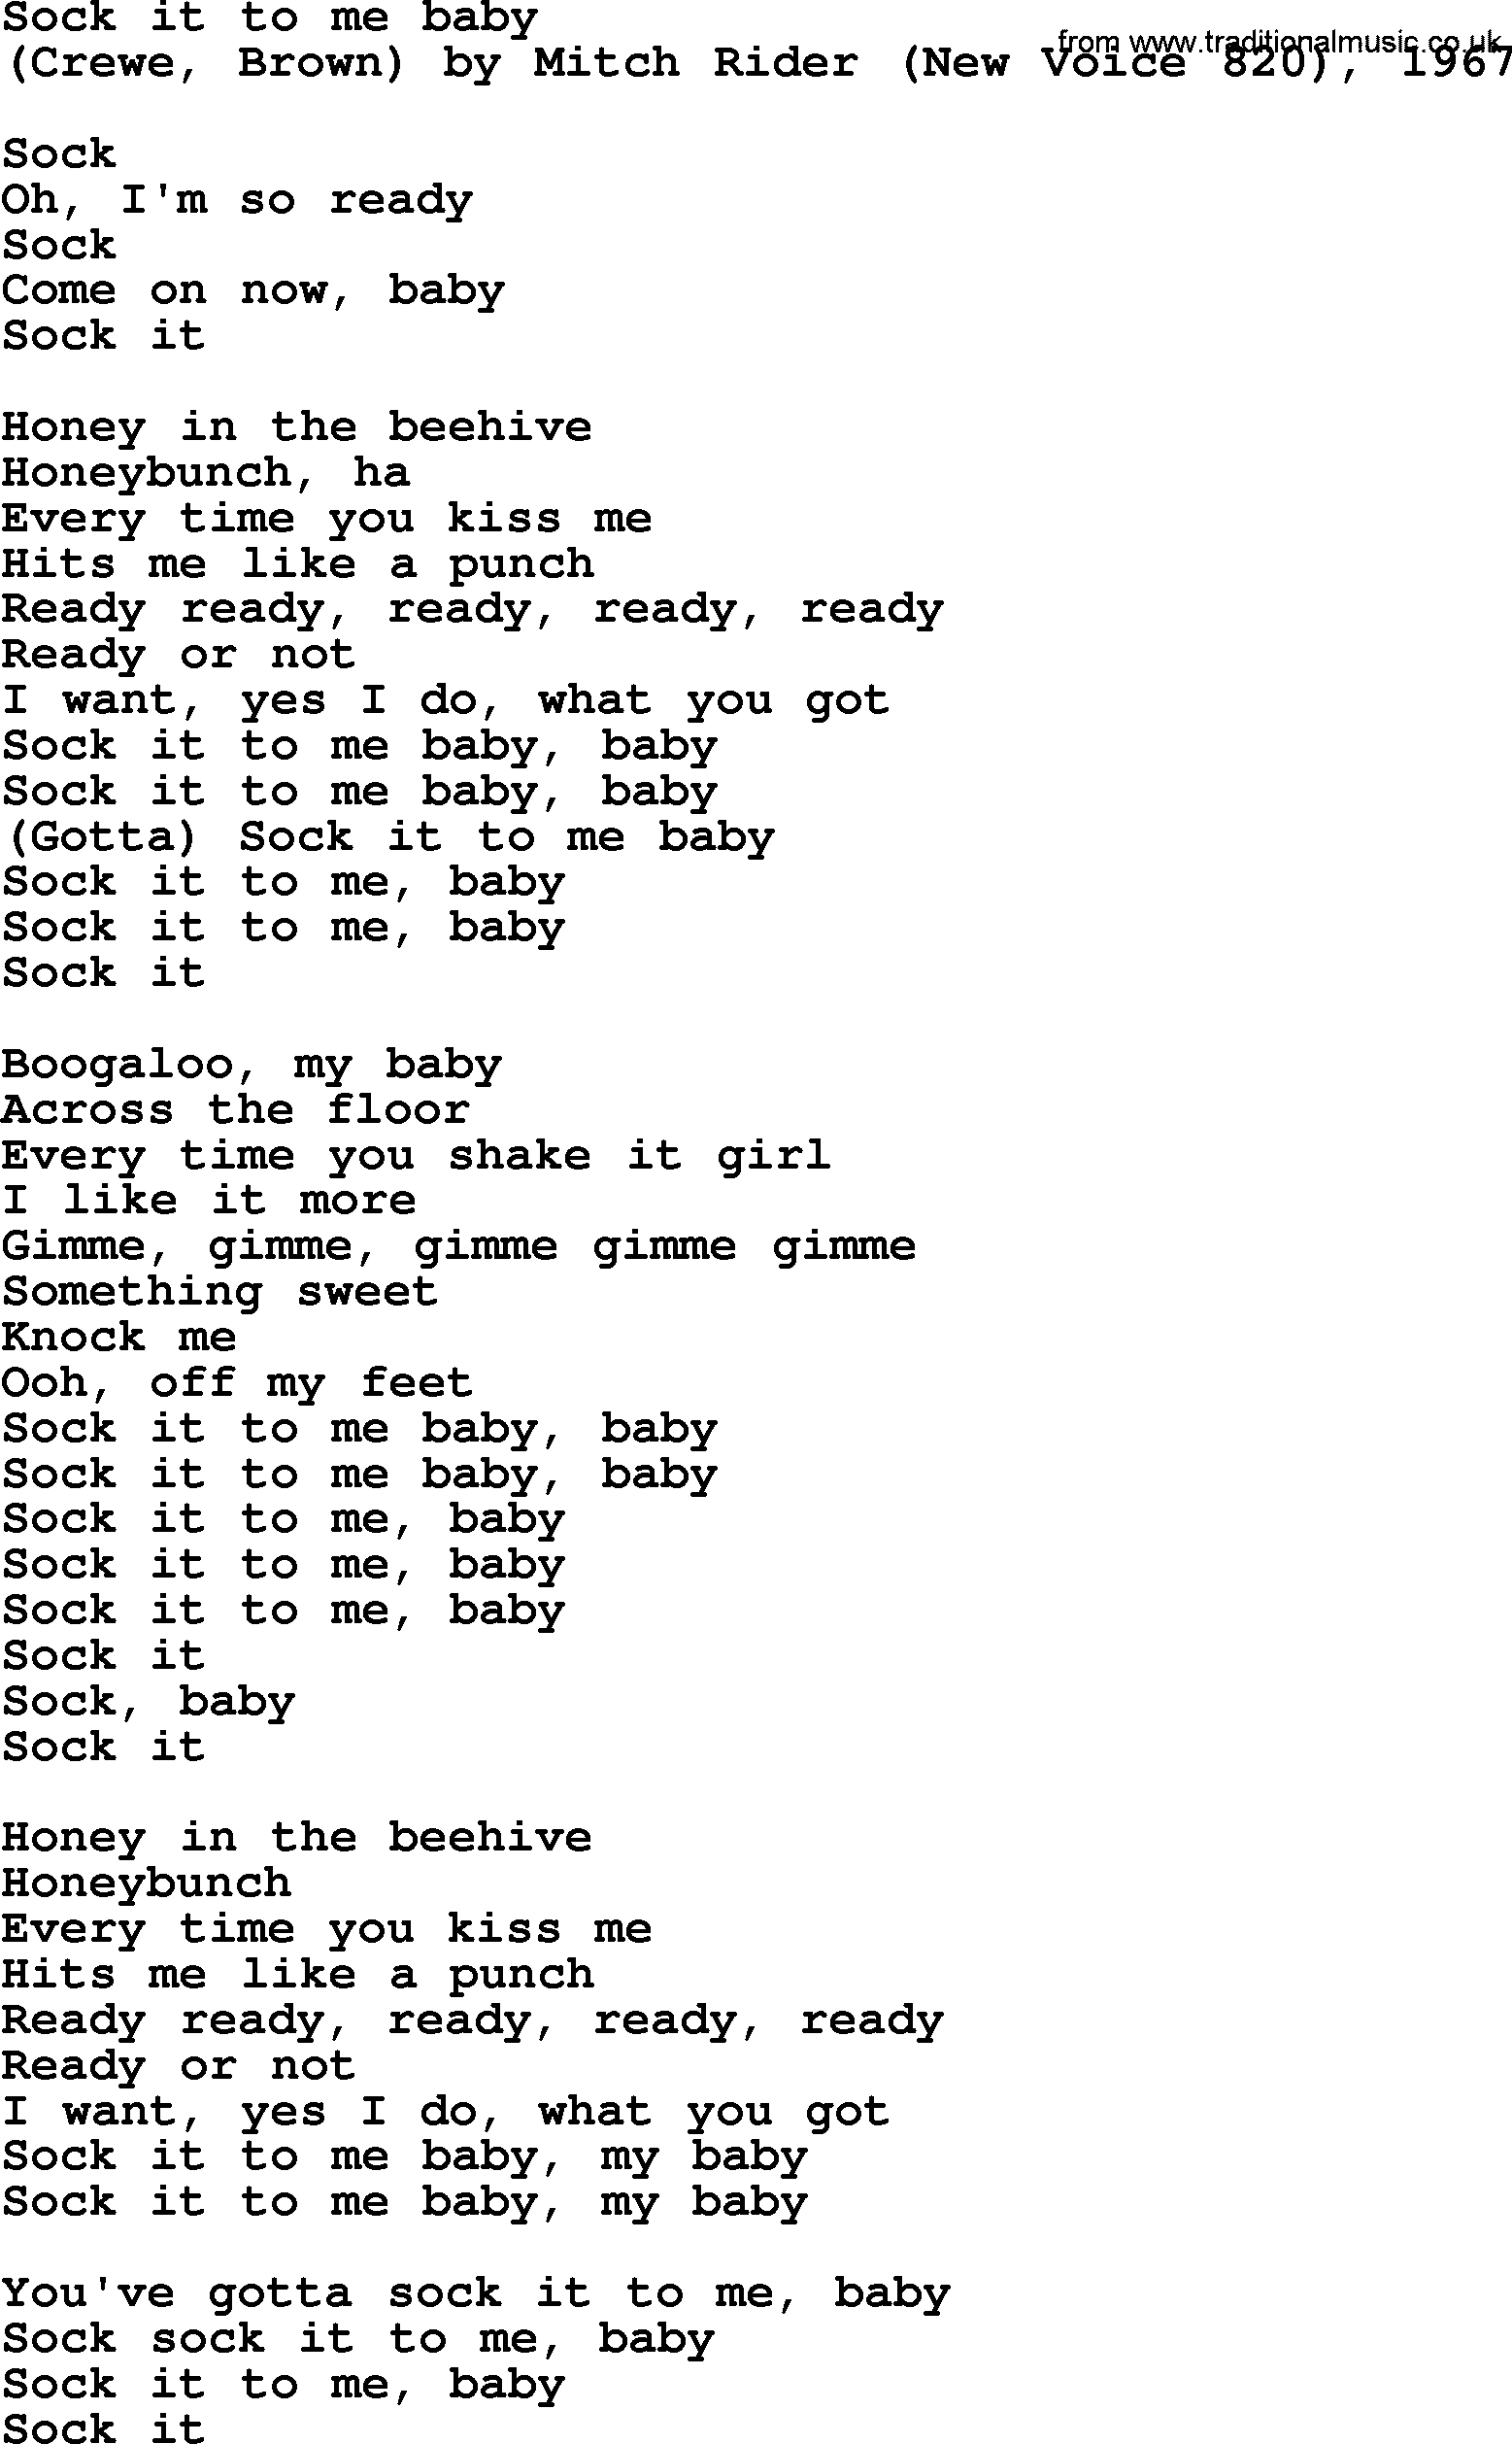 Bruce Springsteen song: Sock It To Me Baby lyrics